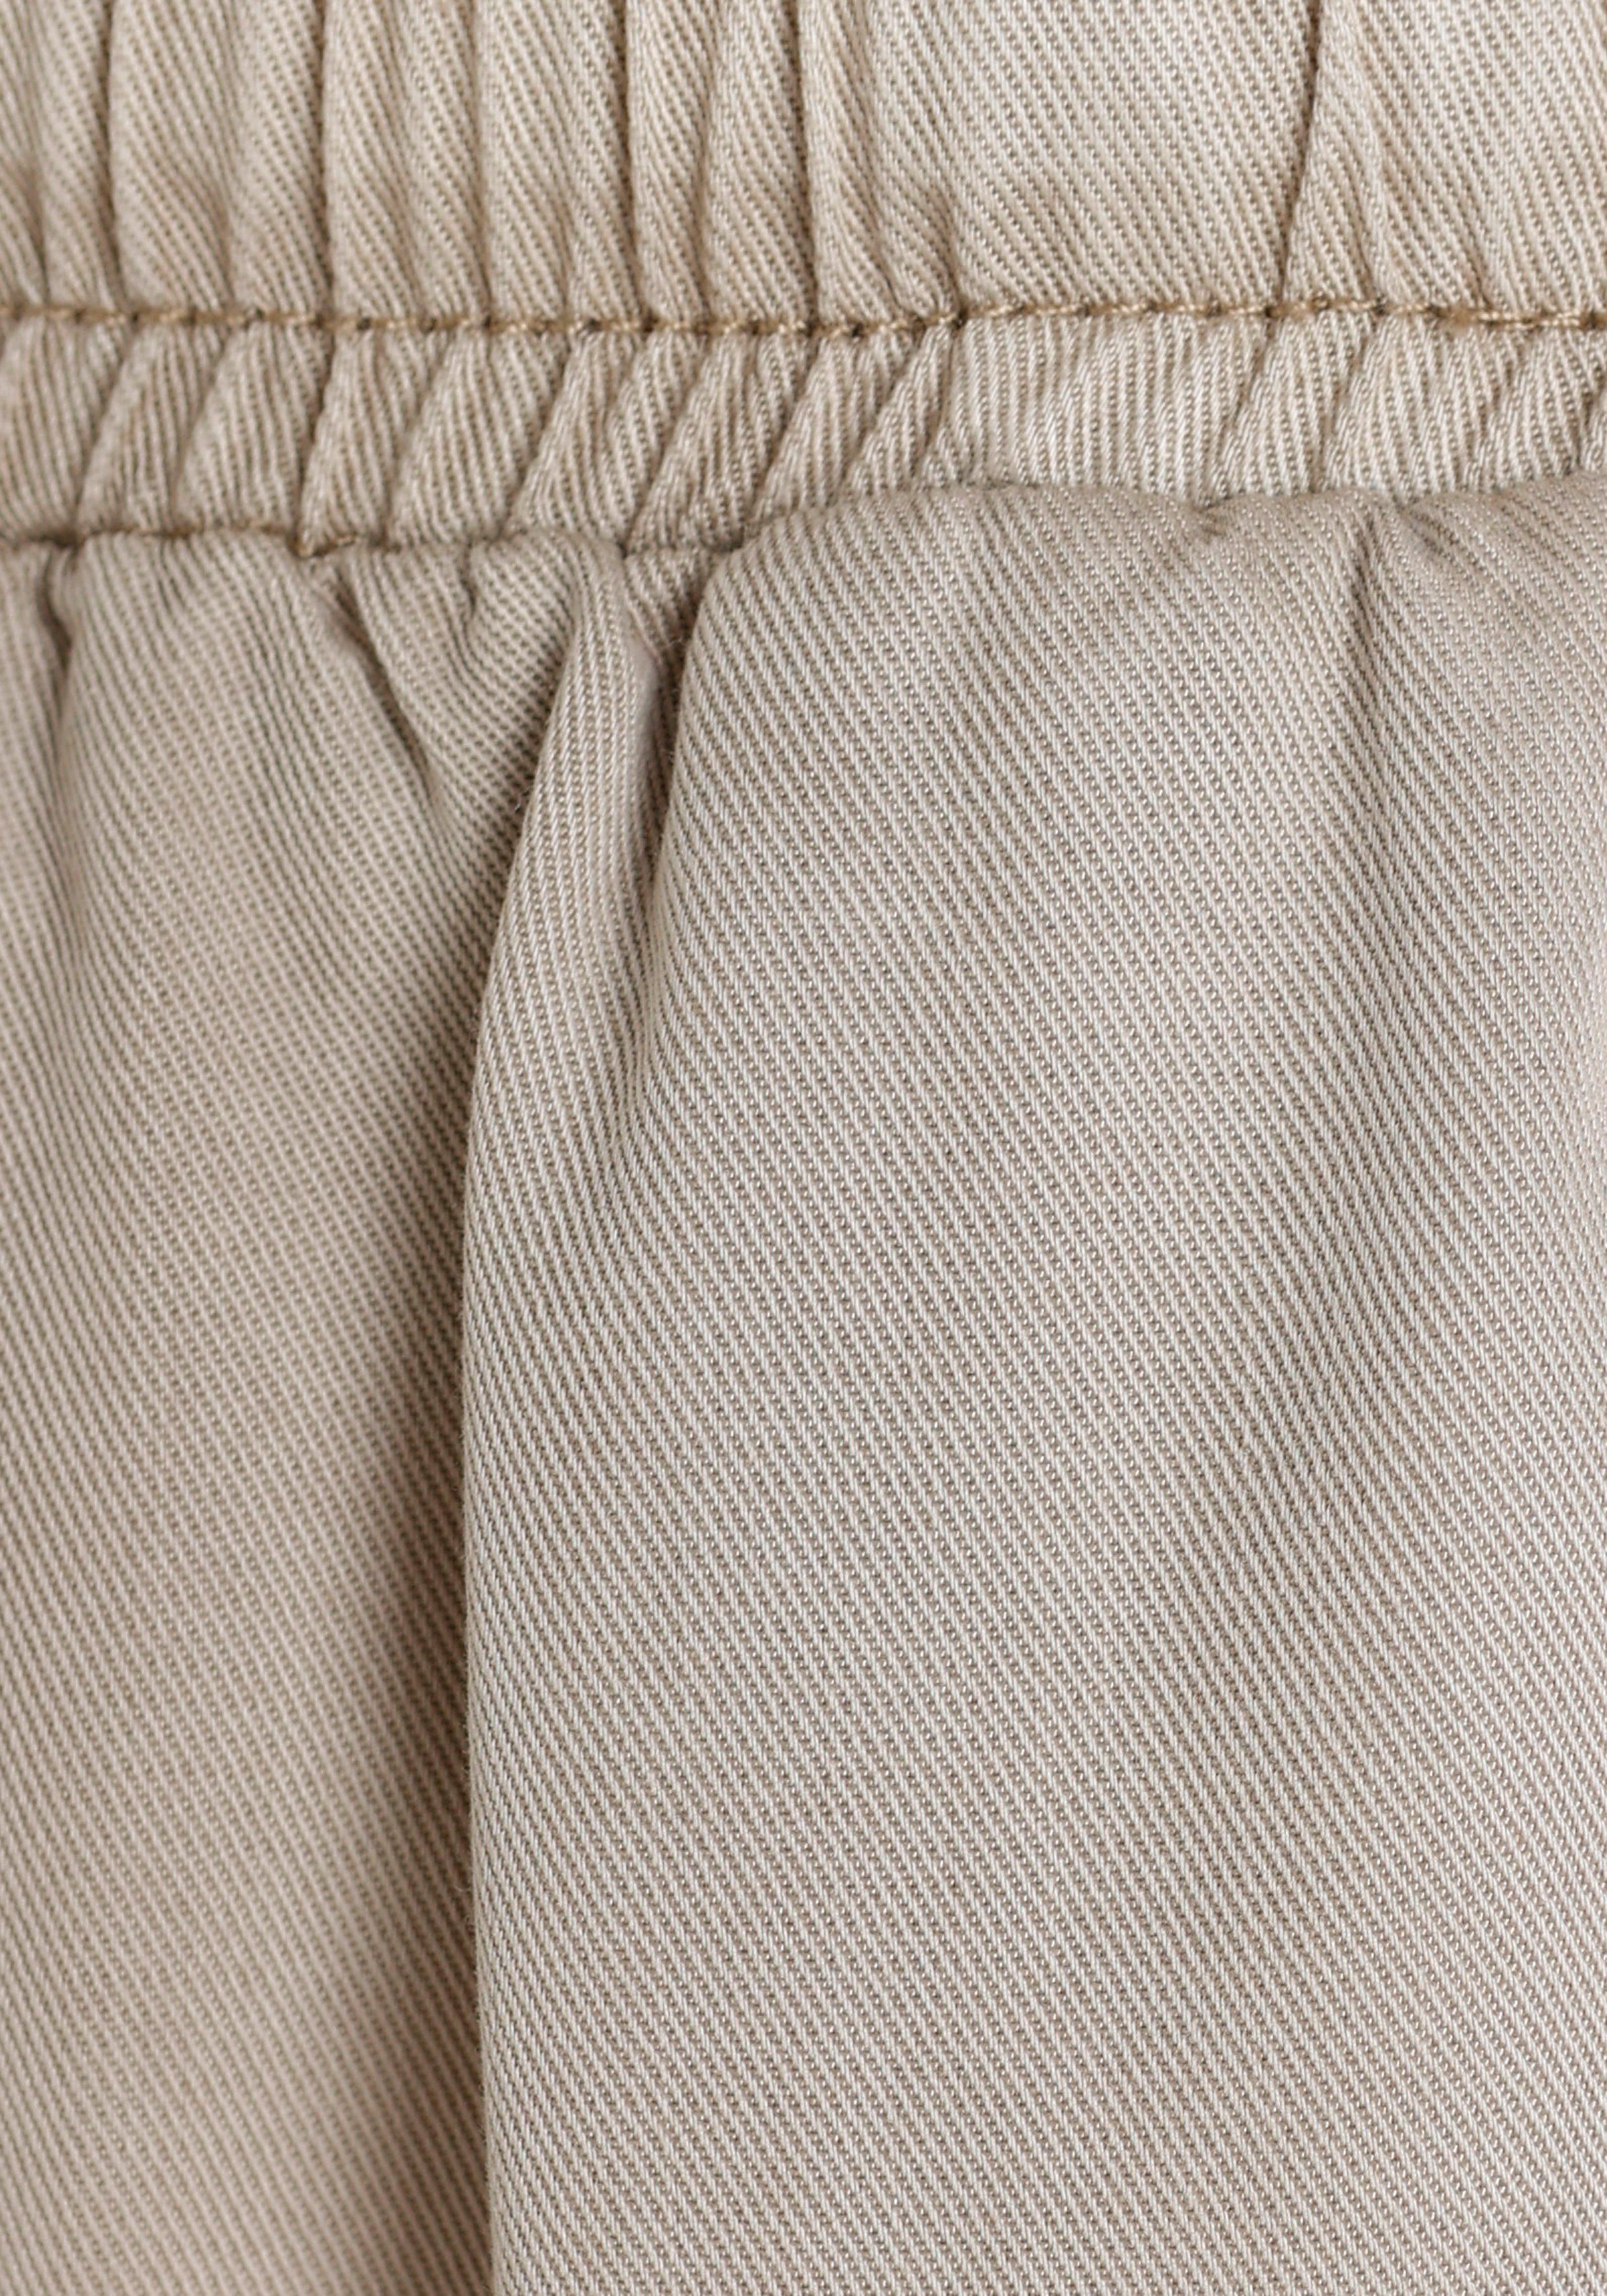 OTTO Marlene-Hose COLLECTION products beige CIRCULAR